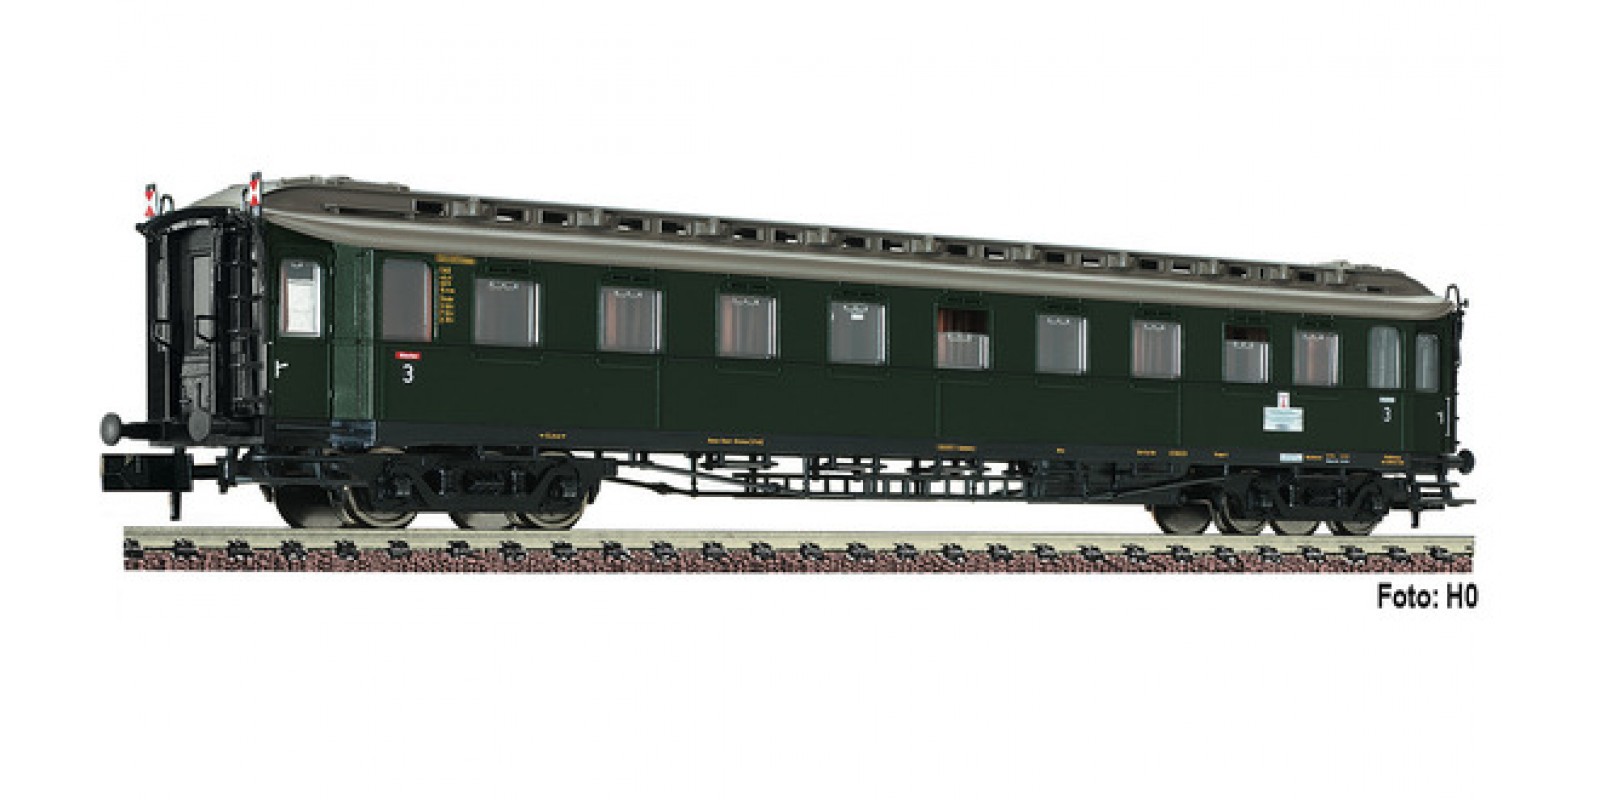 FL878102 - 3rd class express coach type C 4ü with tail end indicators, DB